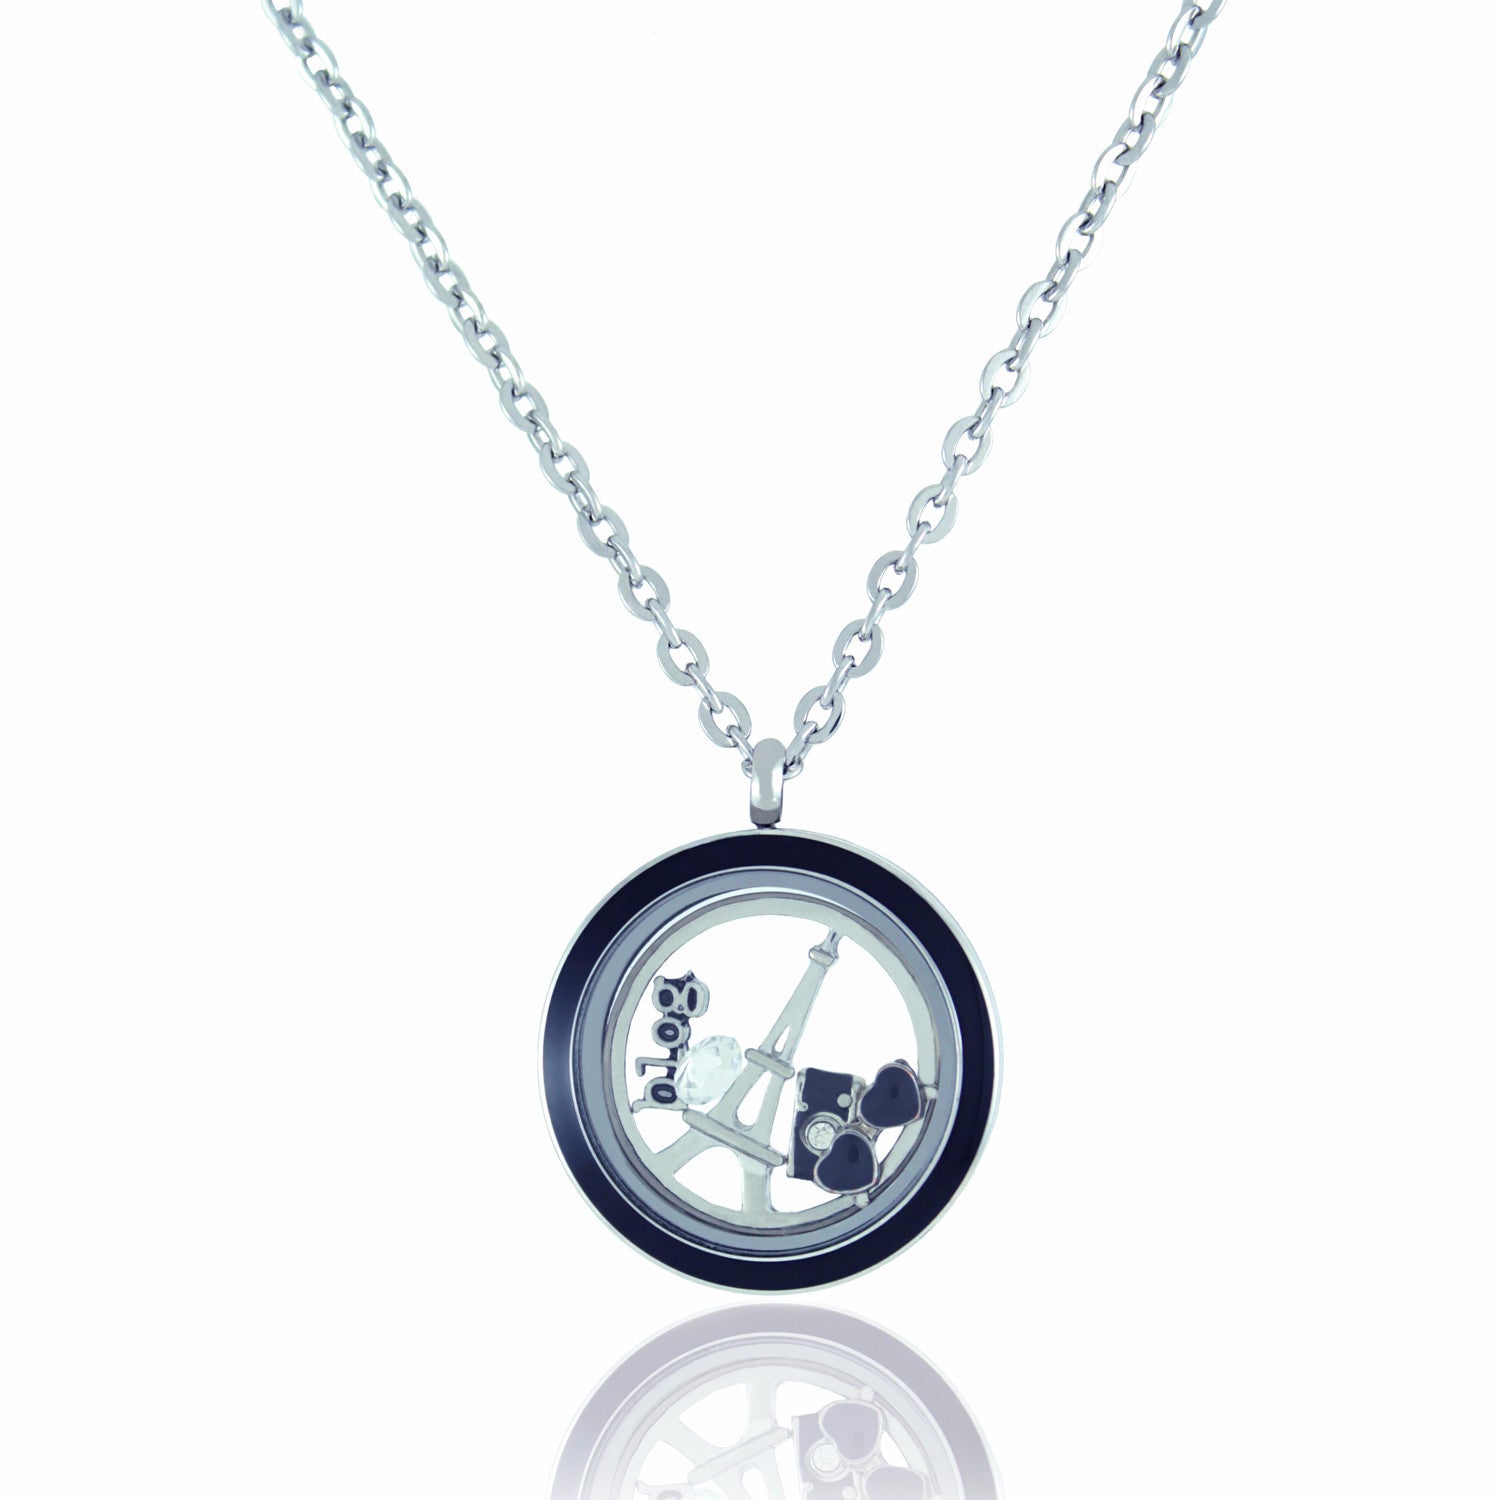 Floating Twist Locket Necklace with 6 Charms and Matching Chain (Twist Black Circle)